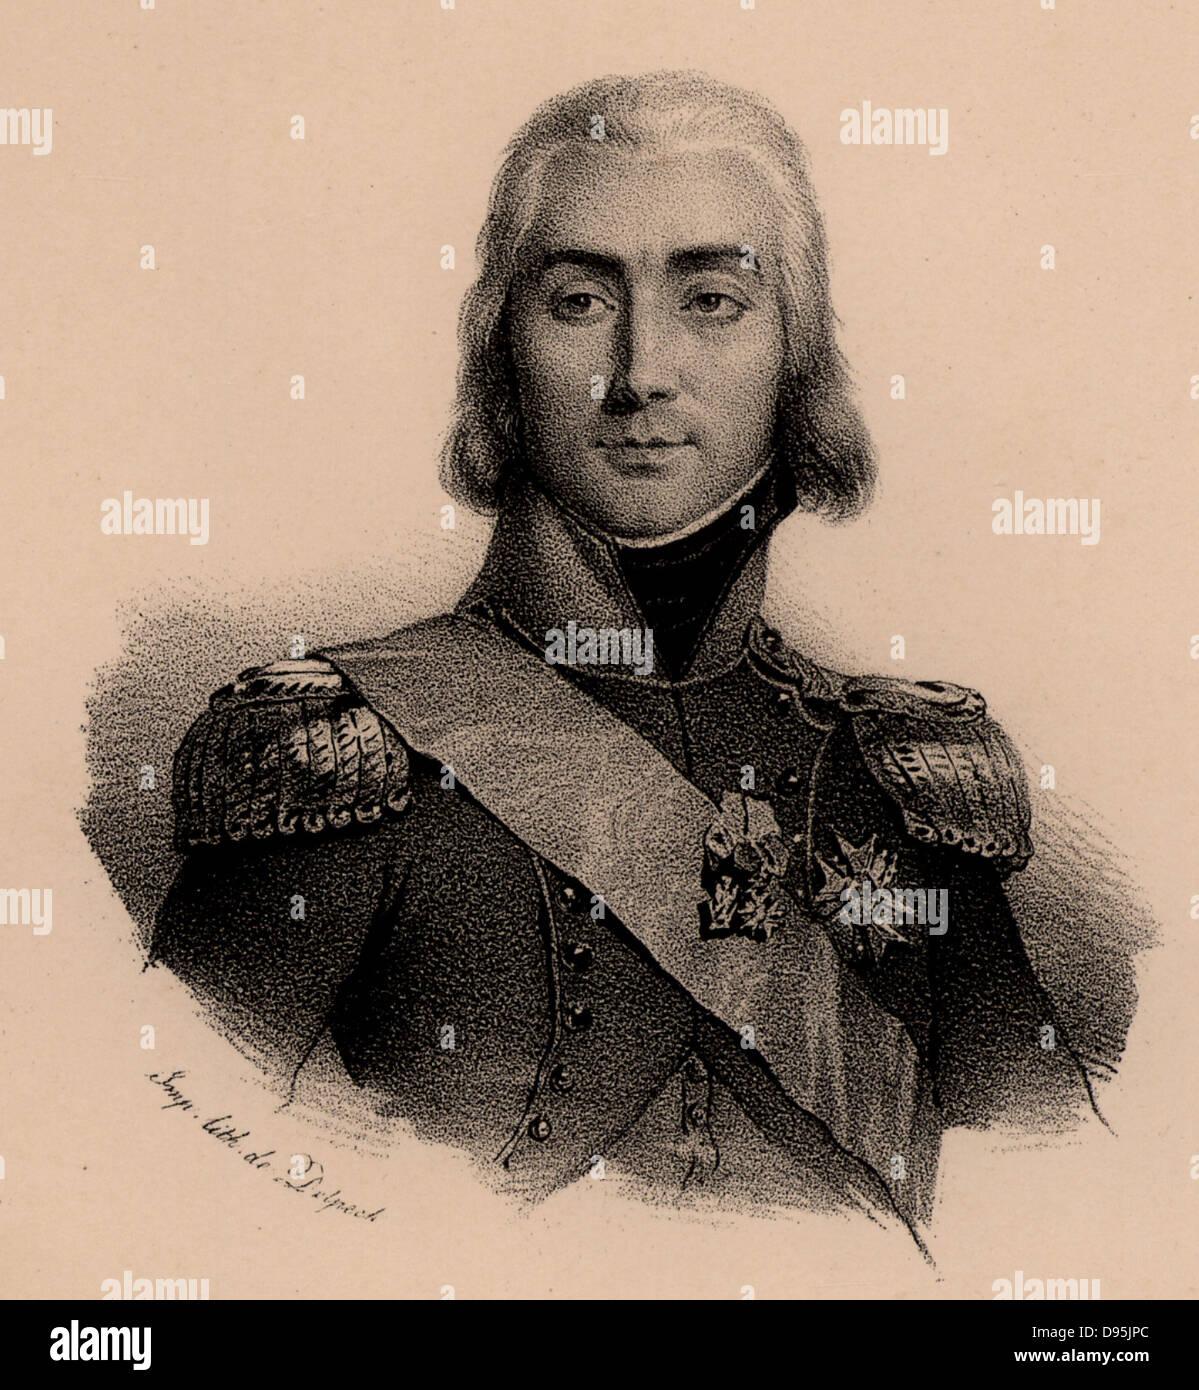 Jean Baptiste Bessieres, Duc d'Istrie (1786-1813).  French soldier, appointed Marshal of France 1804. Distinguished himself at Aboukir and Austerlitz (1805) and fought in the Peninsular and Russian campaigns.  Killed by a stray bullet on the eve of the Battle of Lutzen. Lithograph. Stock Photo